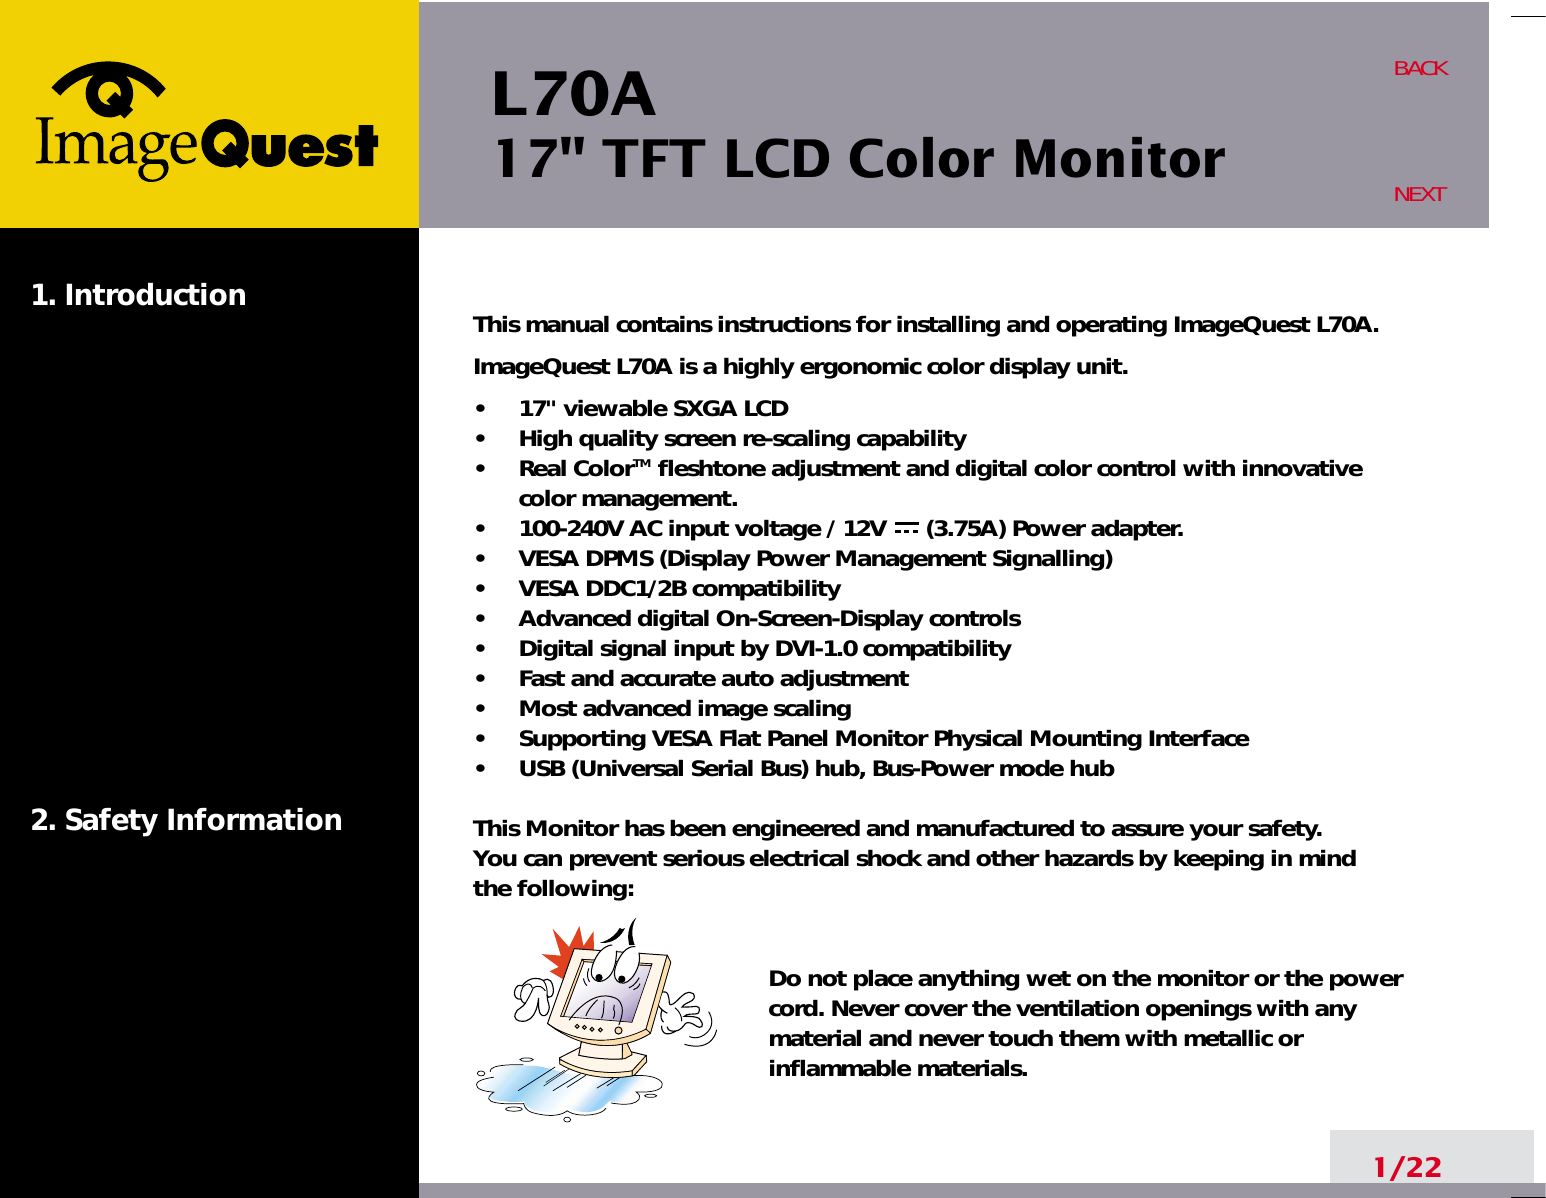 L70A17&quot; TFT LCD Color Monitor1. Introduction2. Safety Information1/22BACKNEXTThis manual contains instructions for installing and operating ImageQuest L70A.ImageQuest L70A is a highly ergonomic color display unit.•     17&quot; viewable SXGA LCD•     High quality screen re-scaling capability•     Real ColorTM fleshtone adjustment and digital color control with innovativecolor management.•     100-240V AC input voltage / 12V      (3.75A) Power adapter.•     VESA DPMS (Display Power Management Signalling)•     VESA DDC1/2B compatibility•     Advanced digital On-Screen-Display controls•     Digital signal input by DVI-1.0 compatibility  •     Fast and accurate auto adjustment  •     Most advanced image scaling•     Supporting VESA Flat Panel Monitor Physical Mounting Interface•     USB (Universal Serial Bus) hub, Bus-Power mode hubThis Monitor has been engineered and manufactured to assure your safety. You can prevent serious electrical shock and other hazards by keeping in mind the following:Do not place anything wet on the monitor or the powercord. Never cover the ventilation openings with anymaterial and never touch them with metallic or inflammable materials.